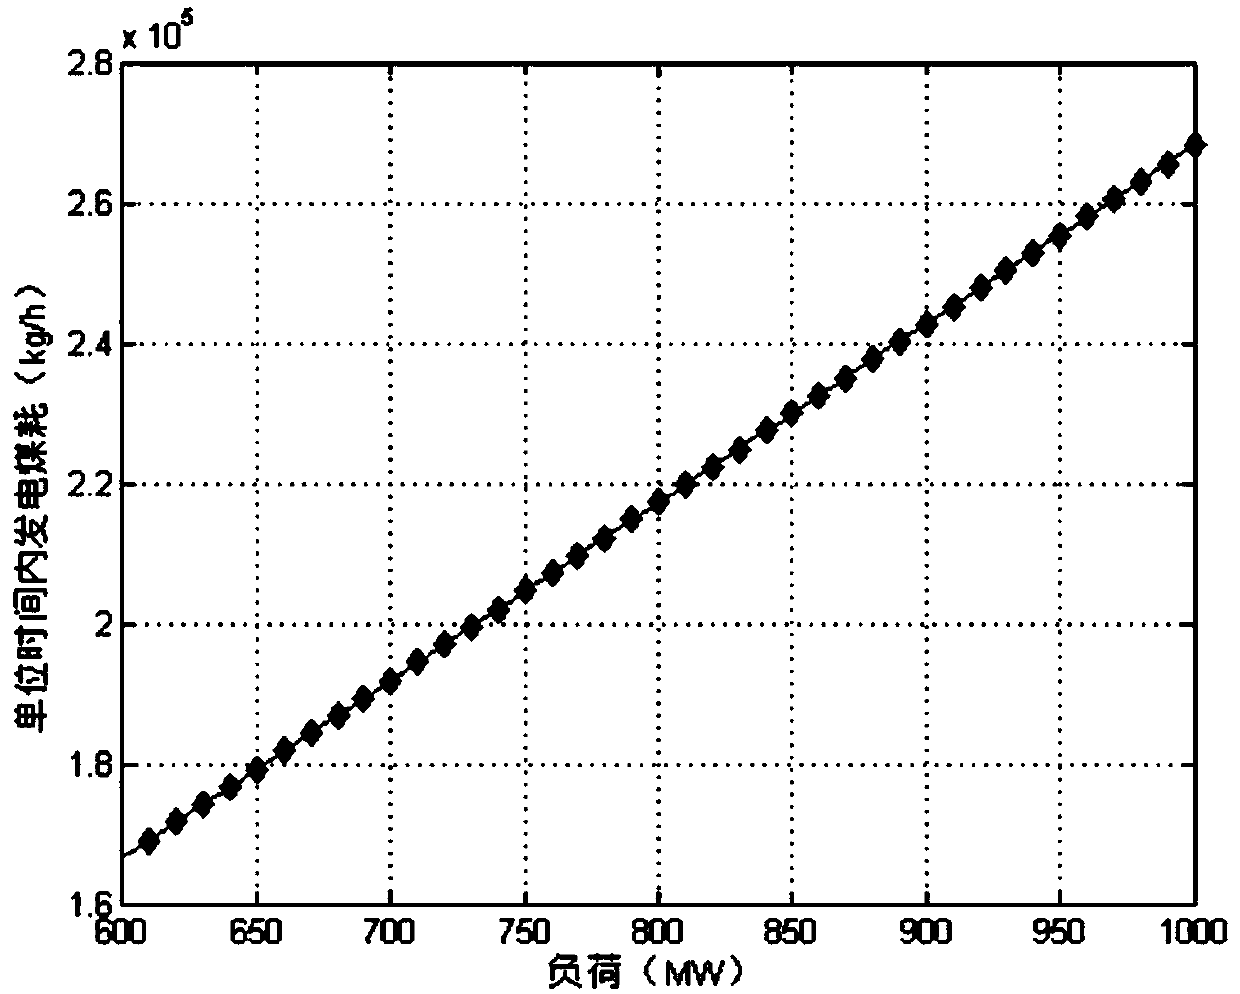 A power generation marginal fuel cost calculation method and device for a generator set